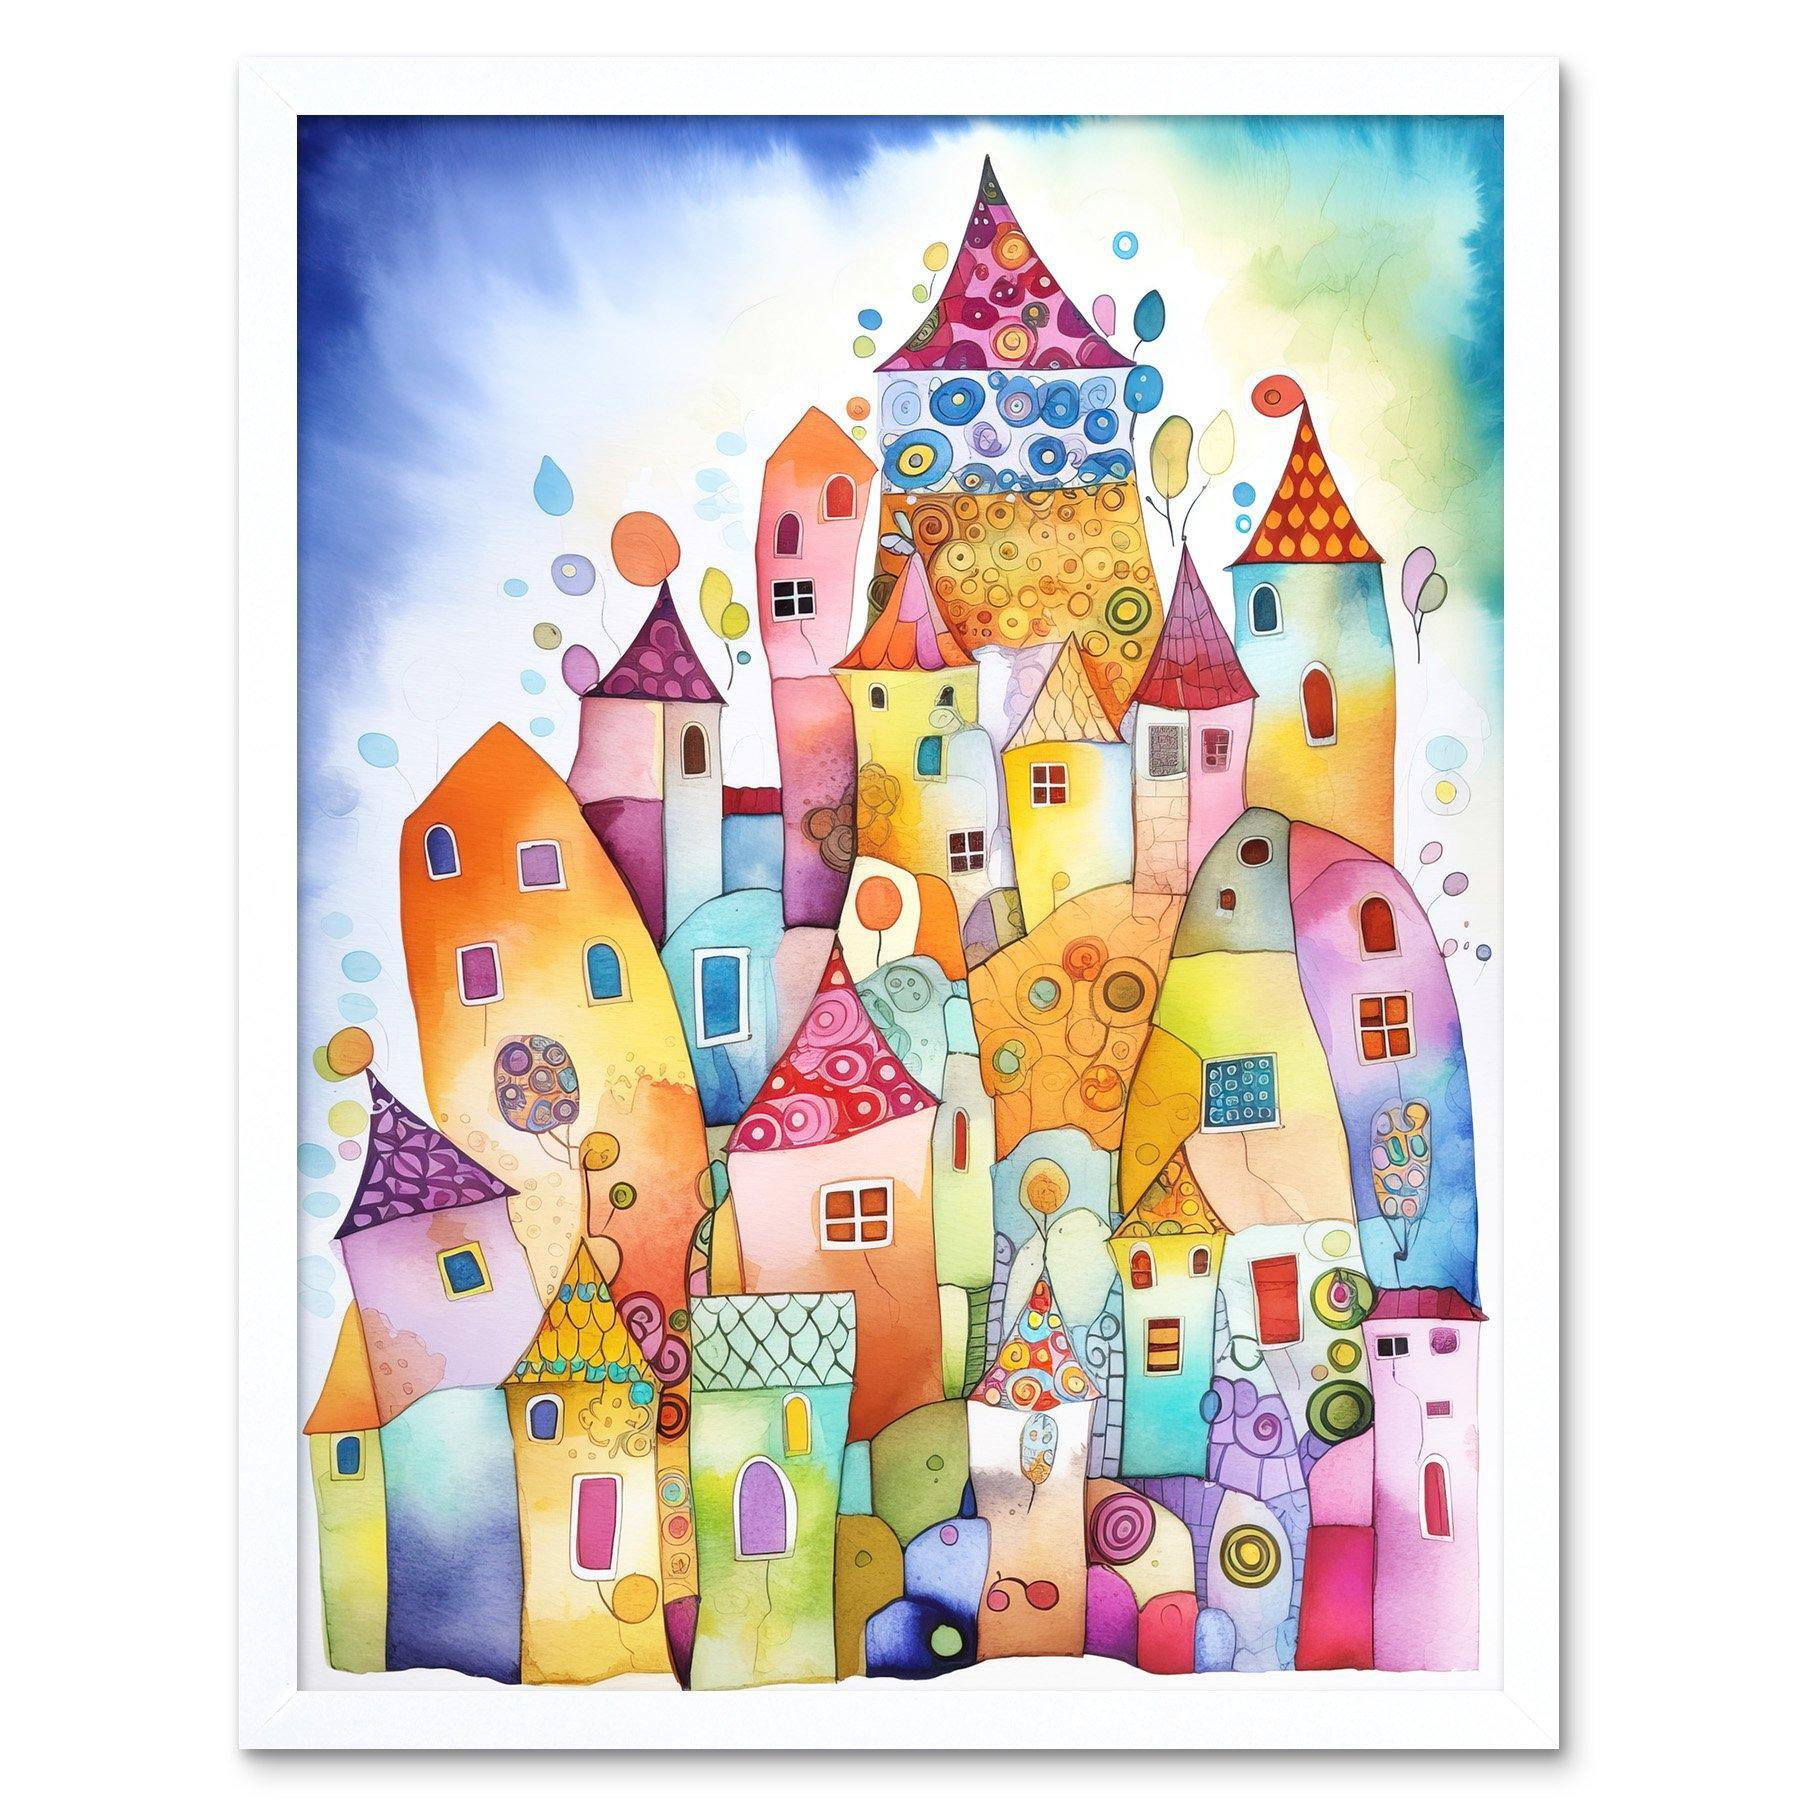 Townscape Housewarming Party Folk Art Watercolour Painting Art Print Framed Poster Wall Decor 12x16 inch - image 1